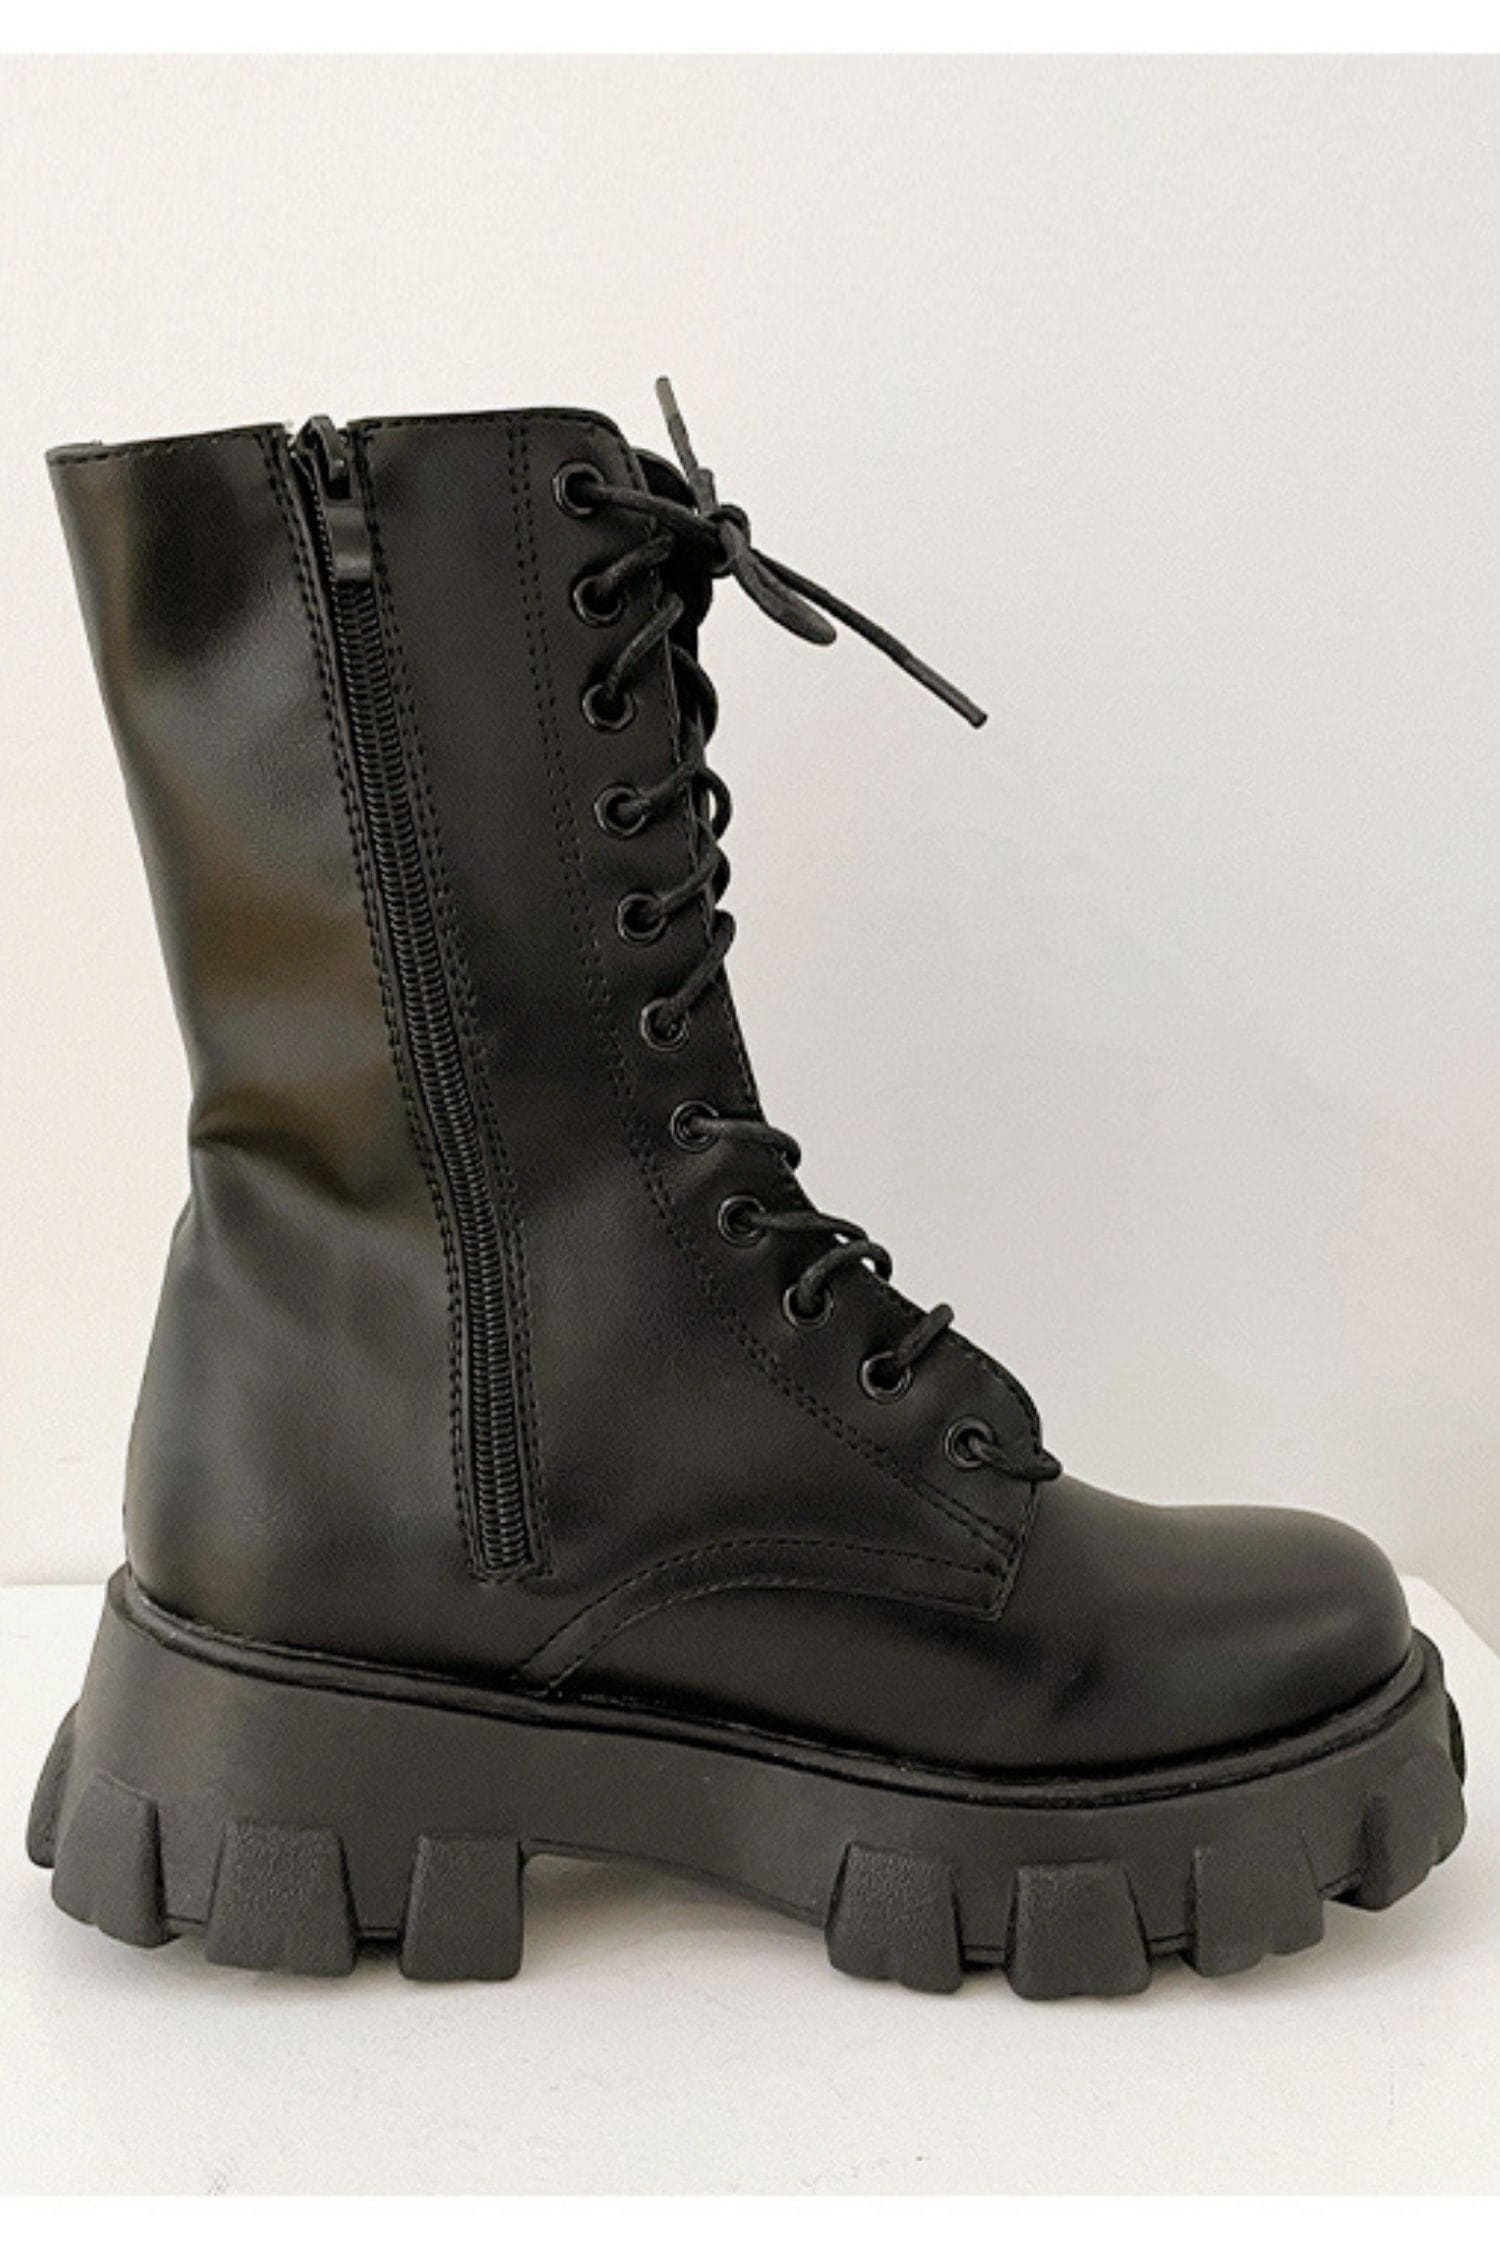 Black Lace Up Mid Calf Boots Shoes